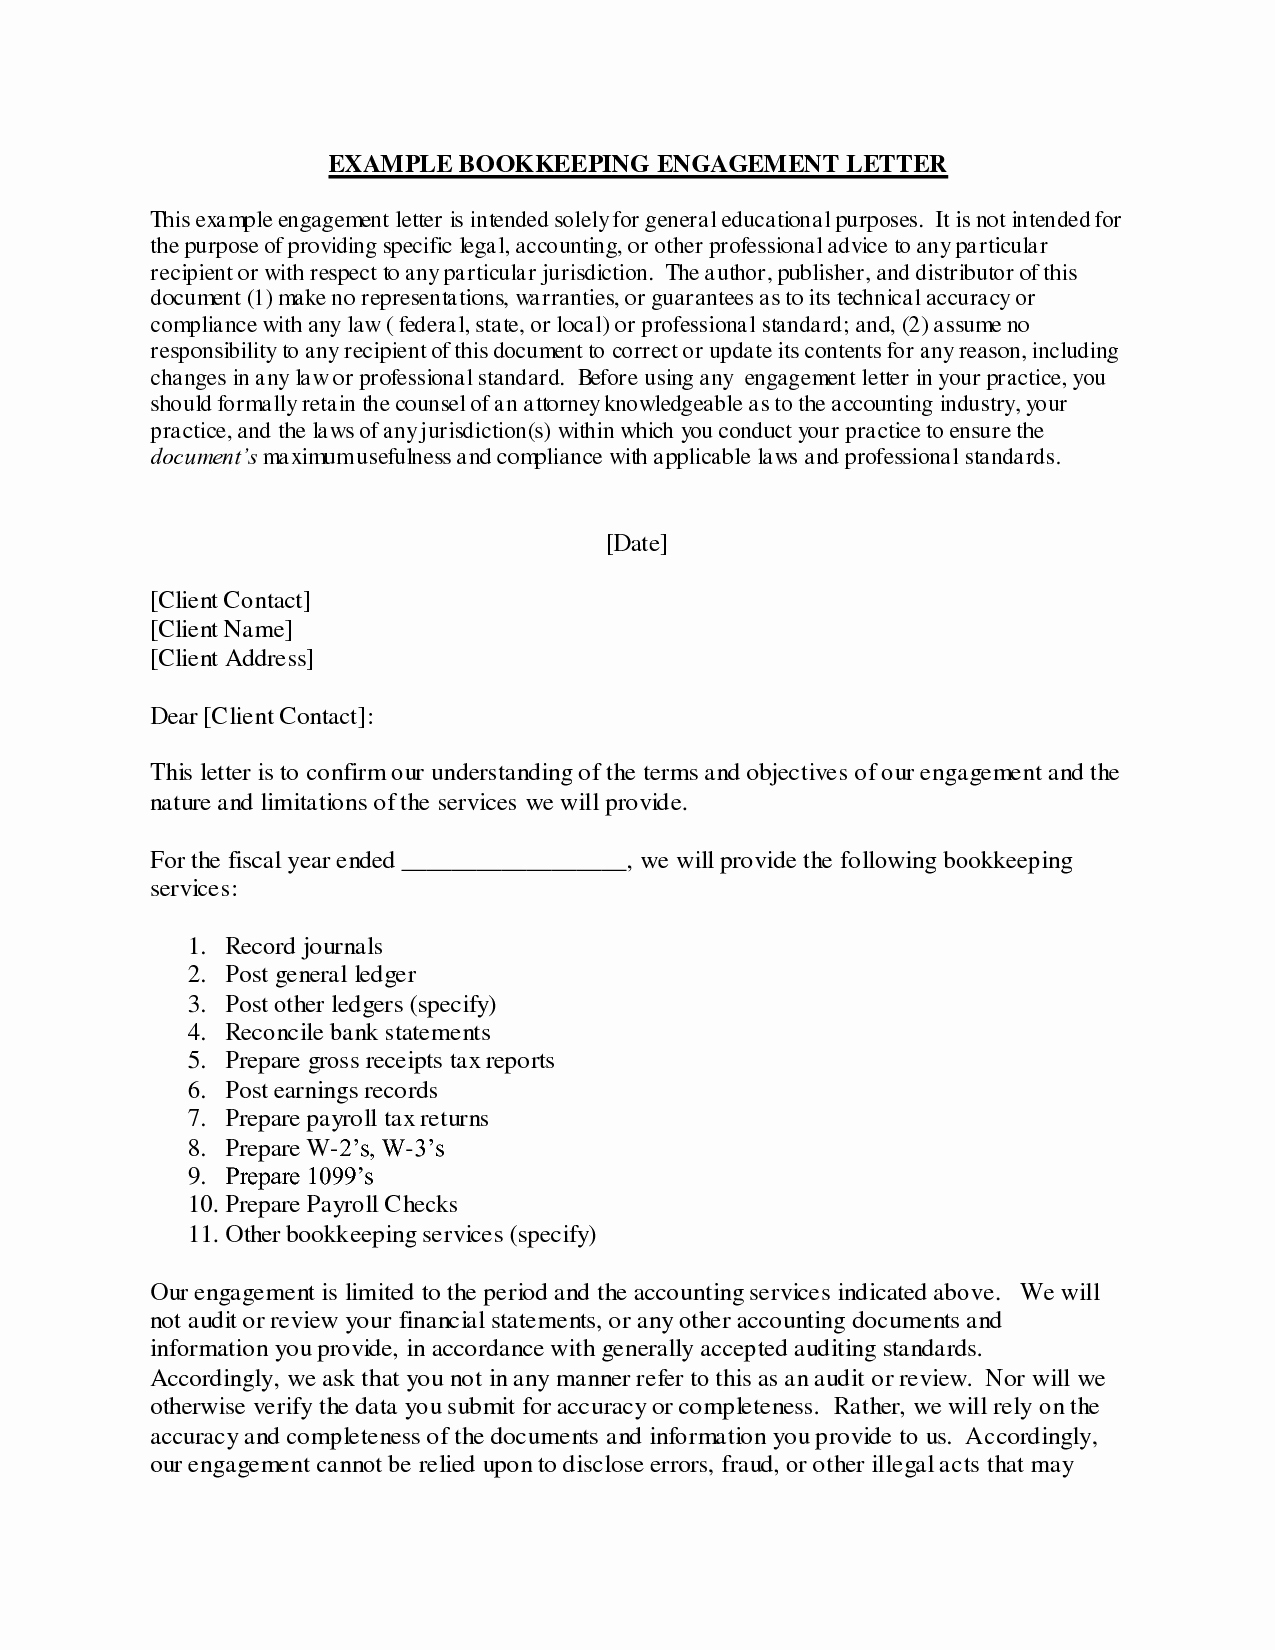 Engagement Letter Template for Accountants - 18 Sample Consulting Engagement Letters